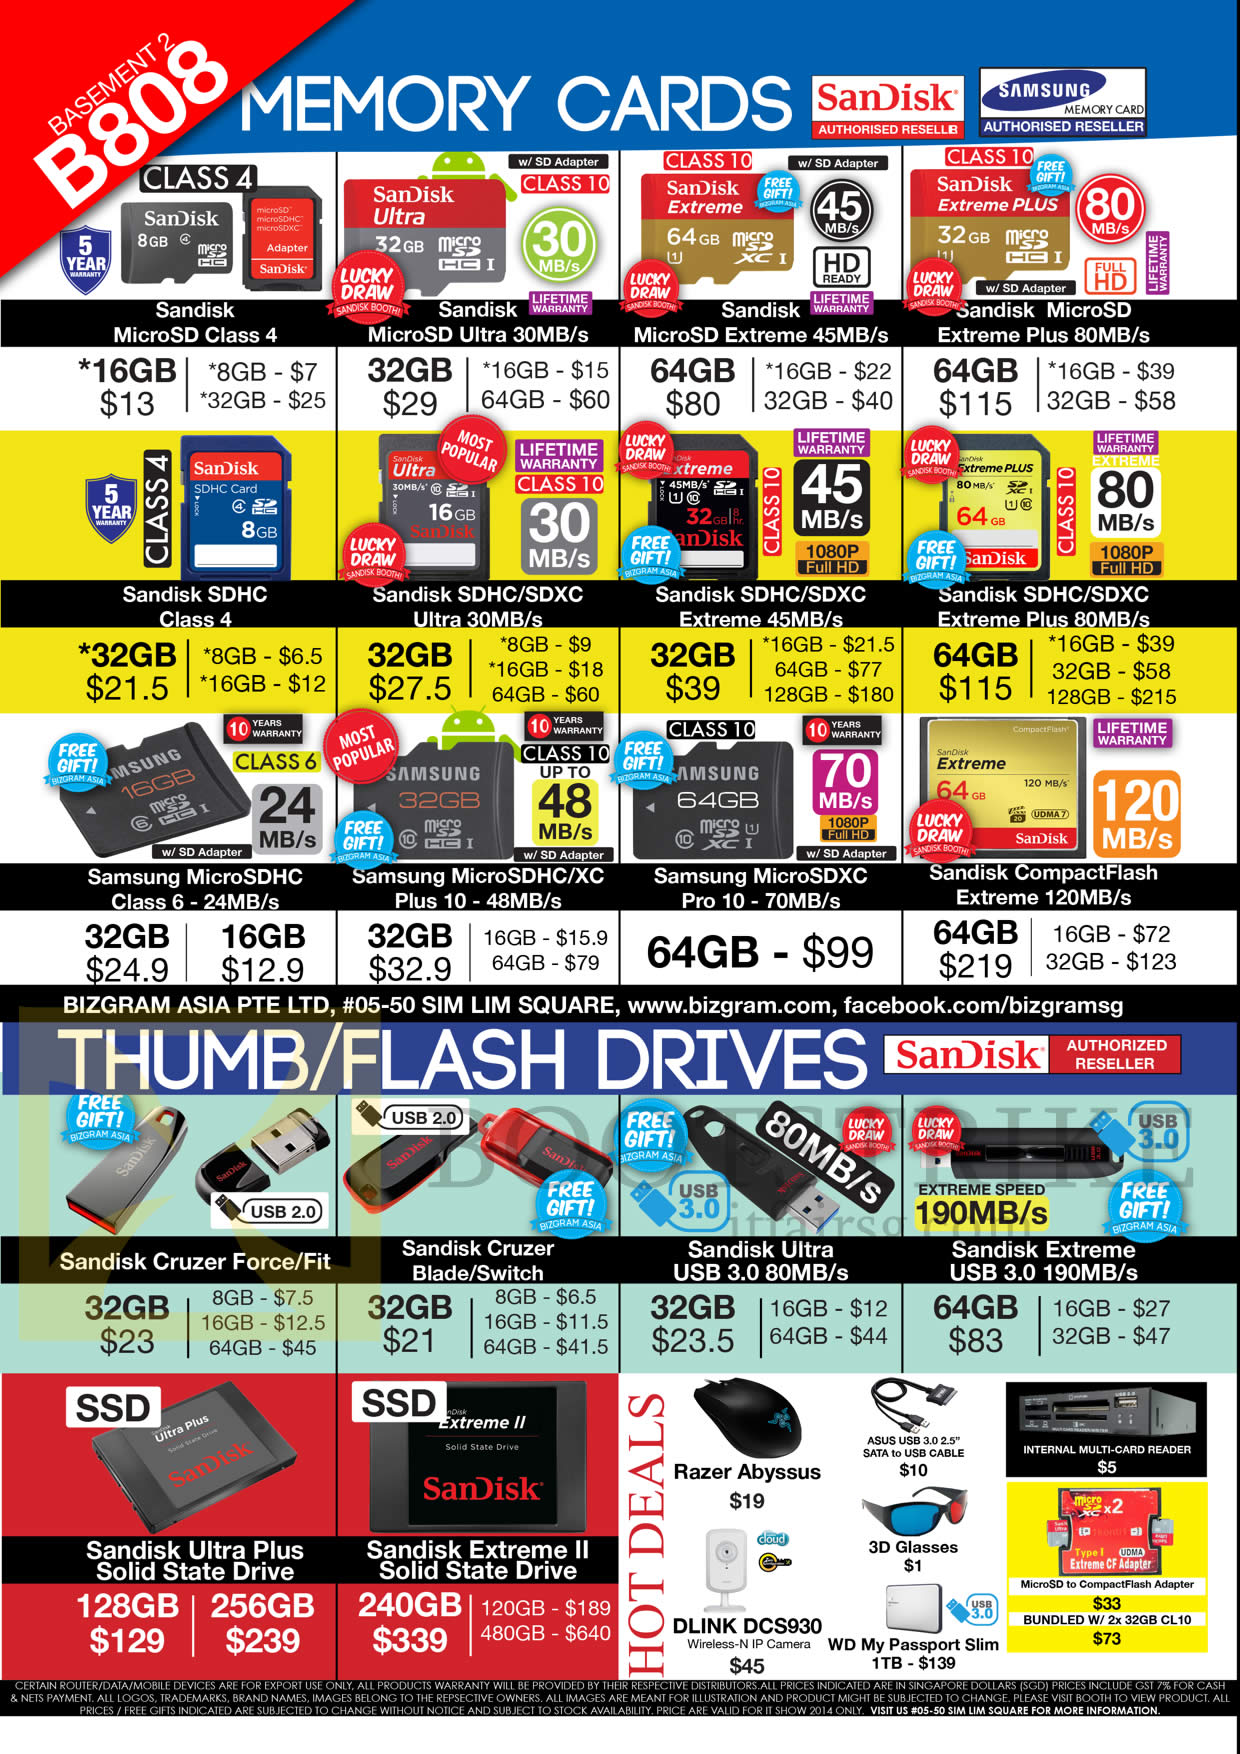 IT SHOW 2014 price list image brochure of Bizgram Memory Cards MicroSD SDHC, Flash Drives Sandisk Cruzer Force Fit Blade Switch Ultra Extreme, Samsung, SSD Ultra Plus